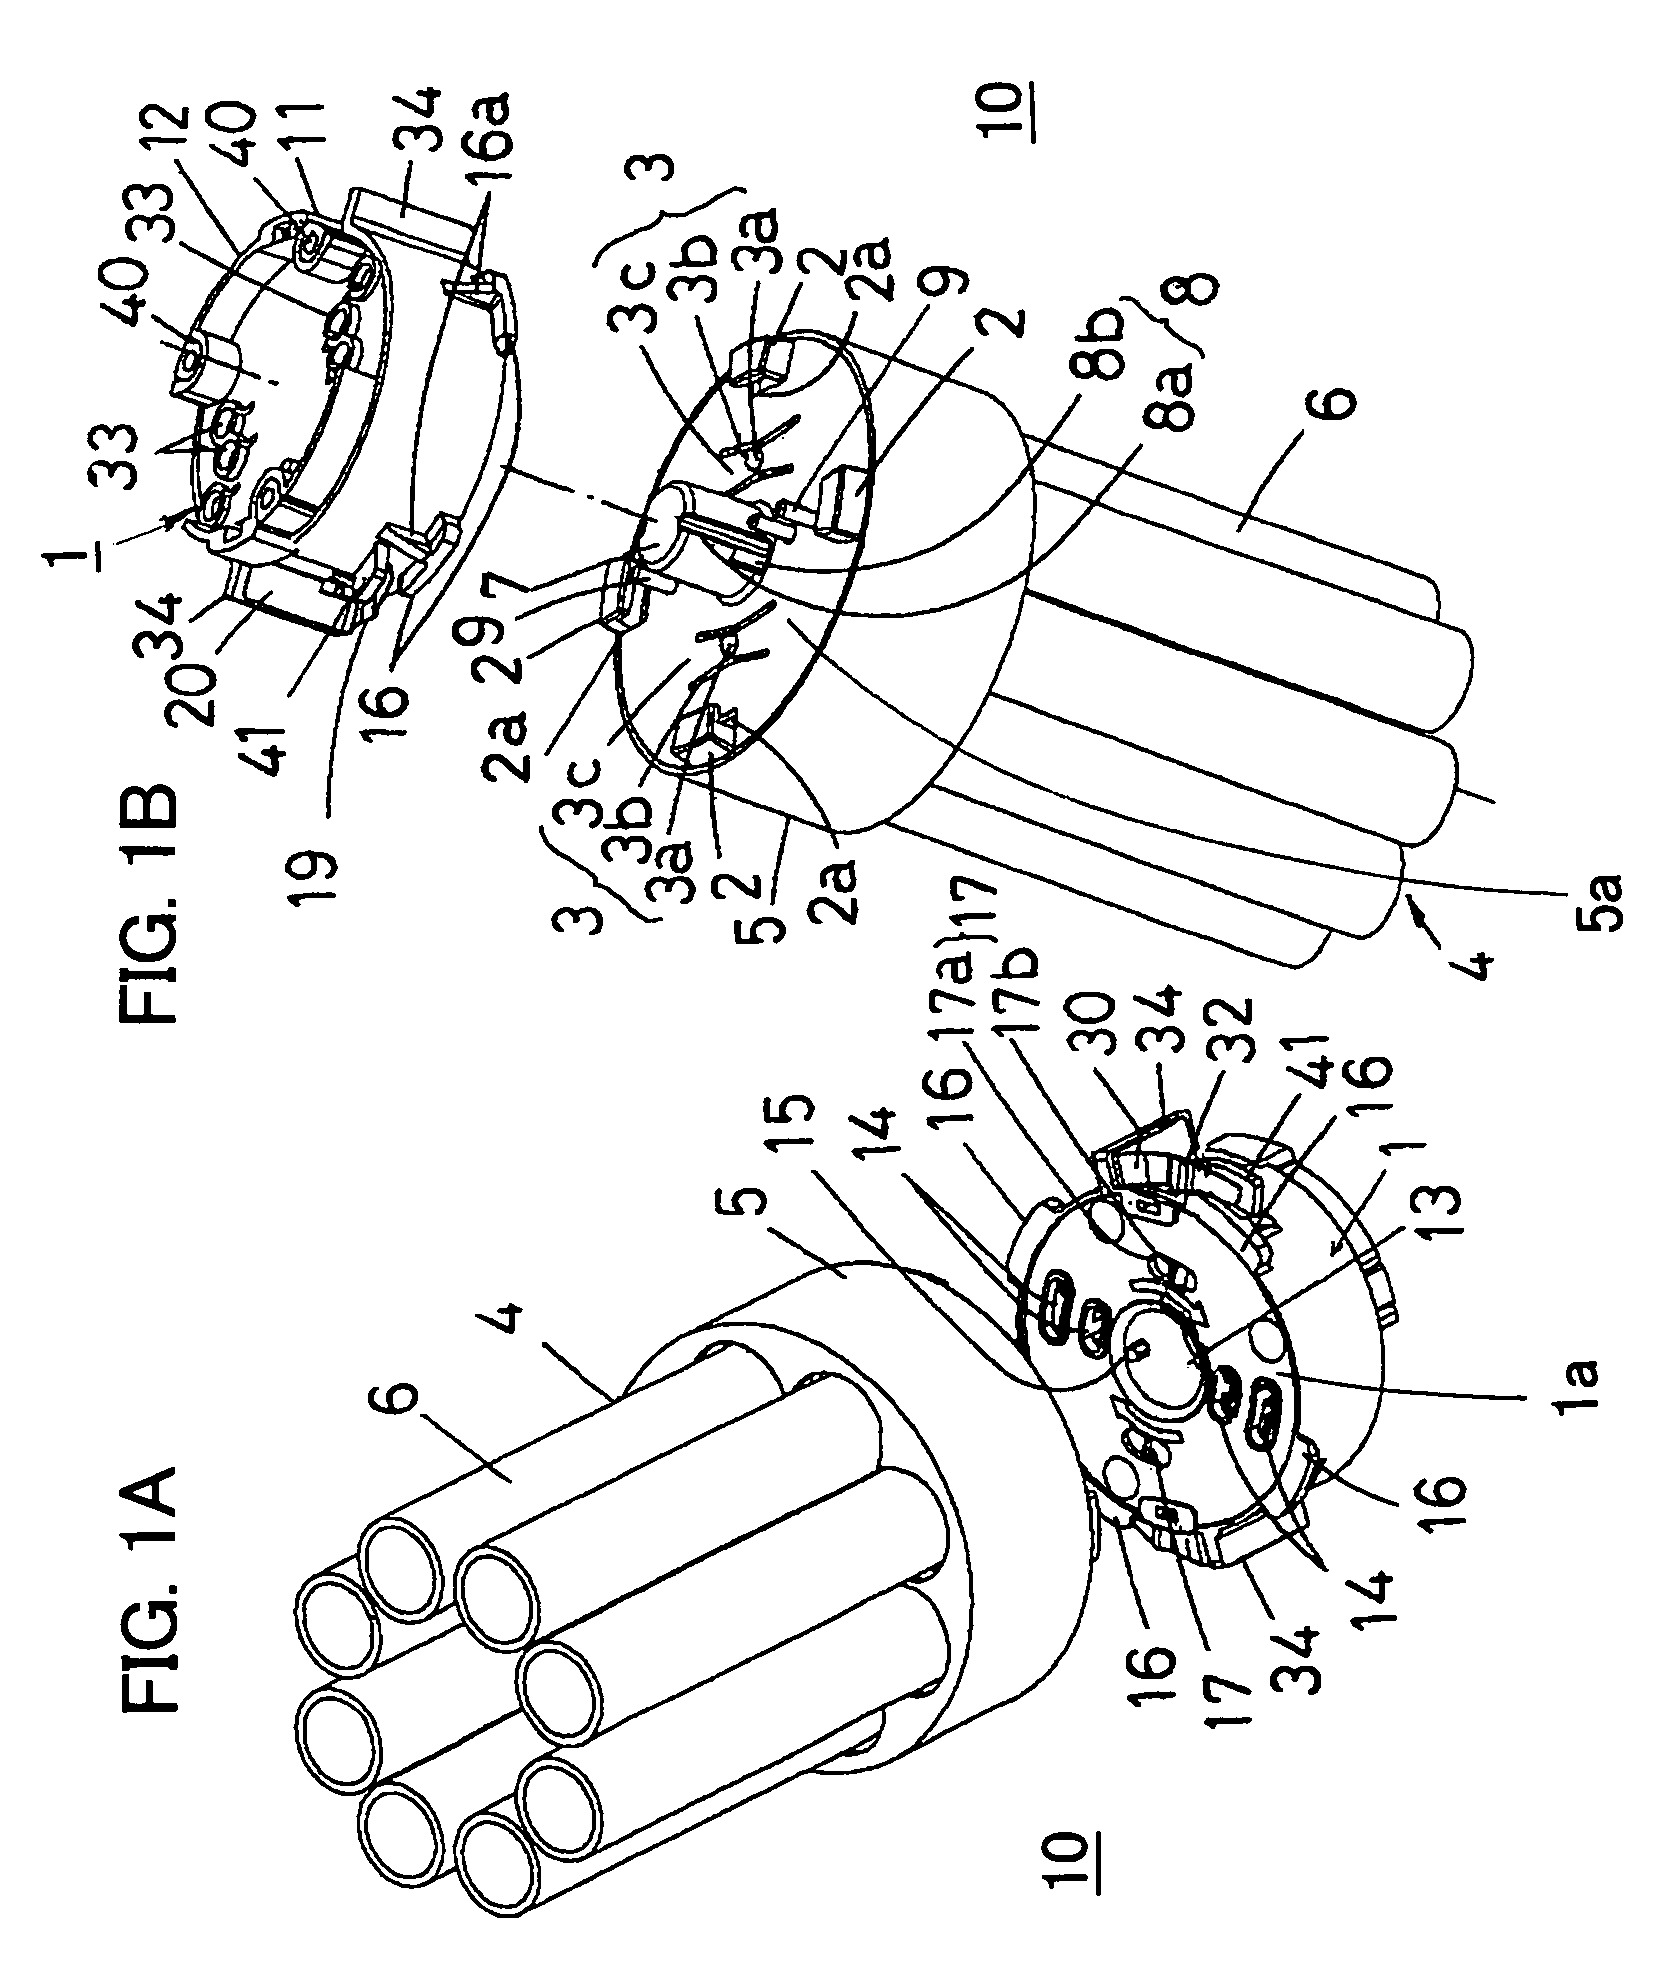 Lamp holder for lamp with a single base and lighting apparatus using the same